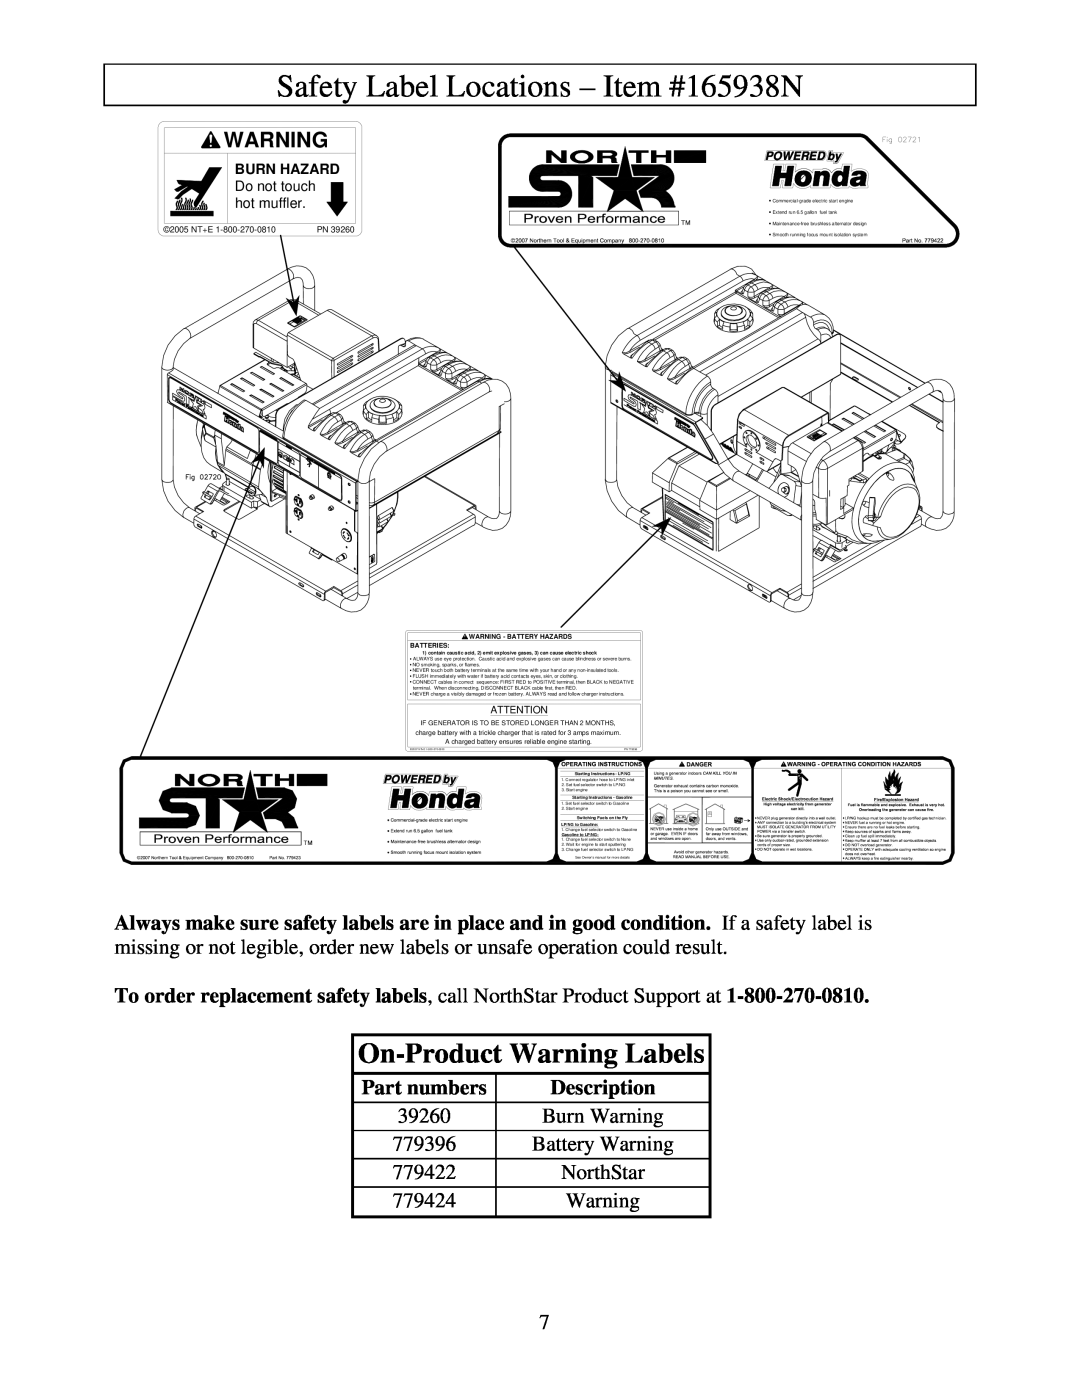 North Star M165938N Safety Label Locations - Item #165938N, On-Product Warning Labels, Part numbers, Description 